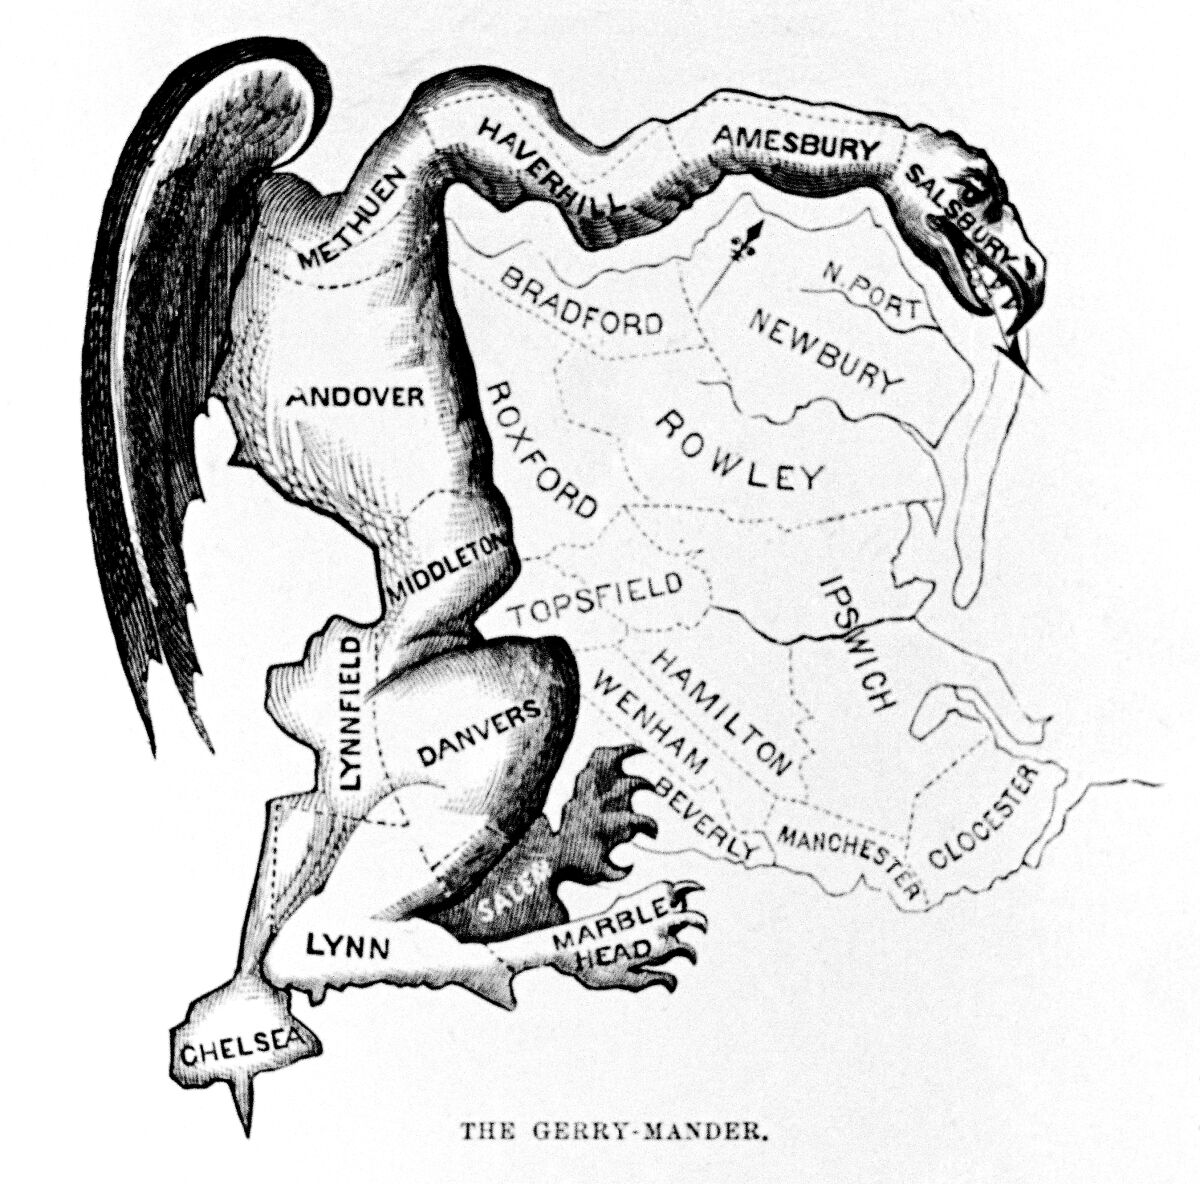 The term "gerrymander" stems from this Gilbert Stuart cartoon of a Massachusetts electoral district twisted beyond reason.